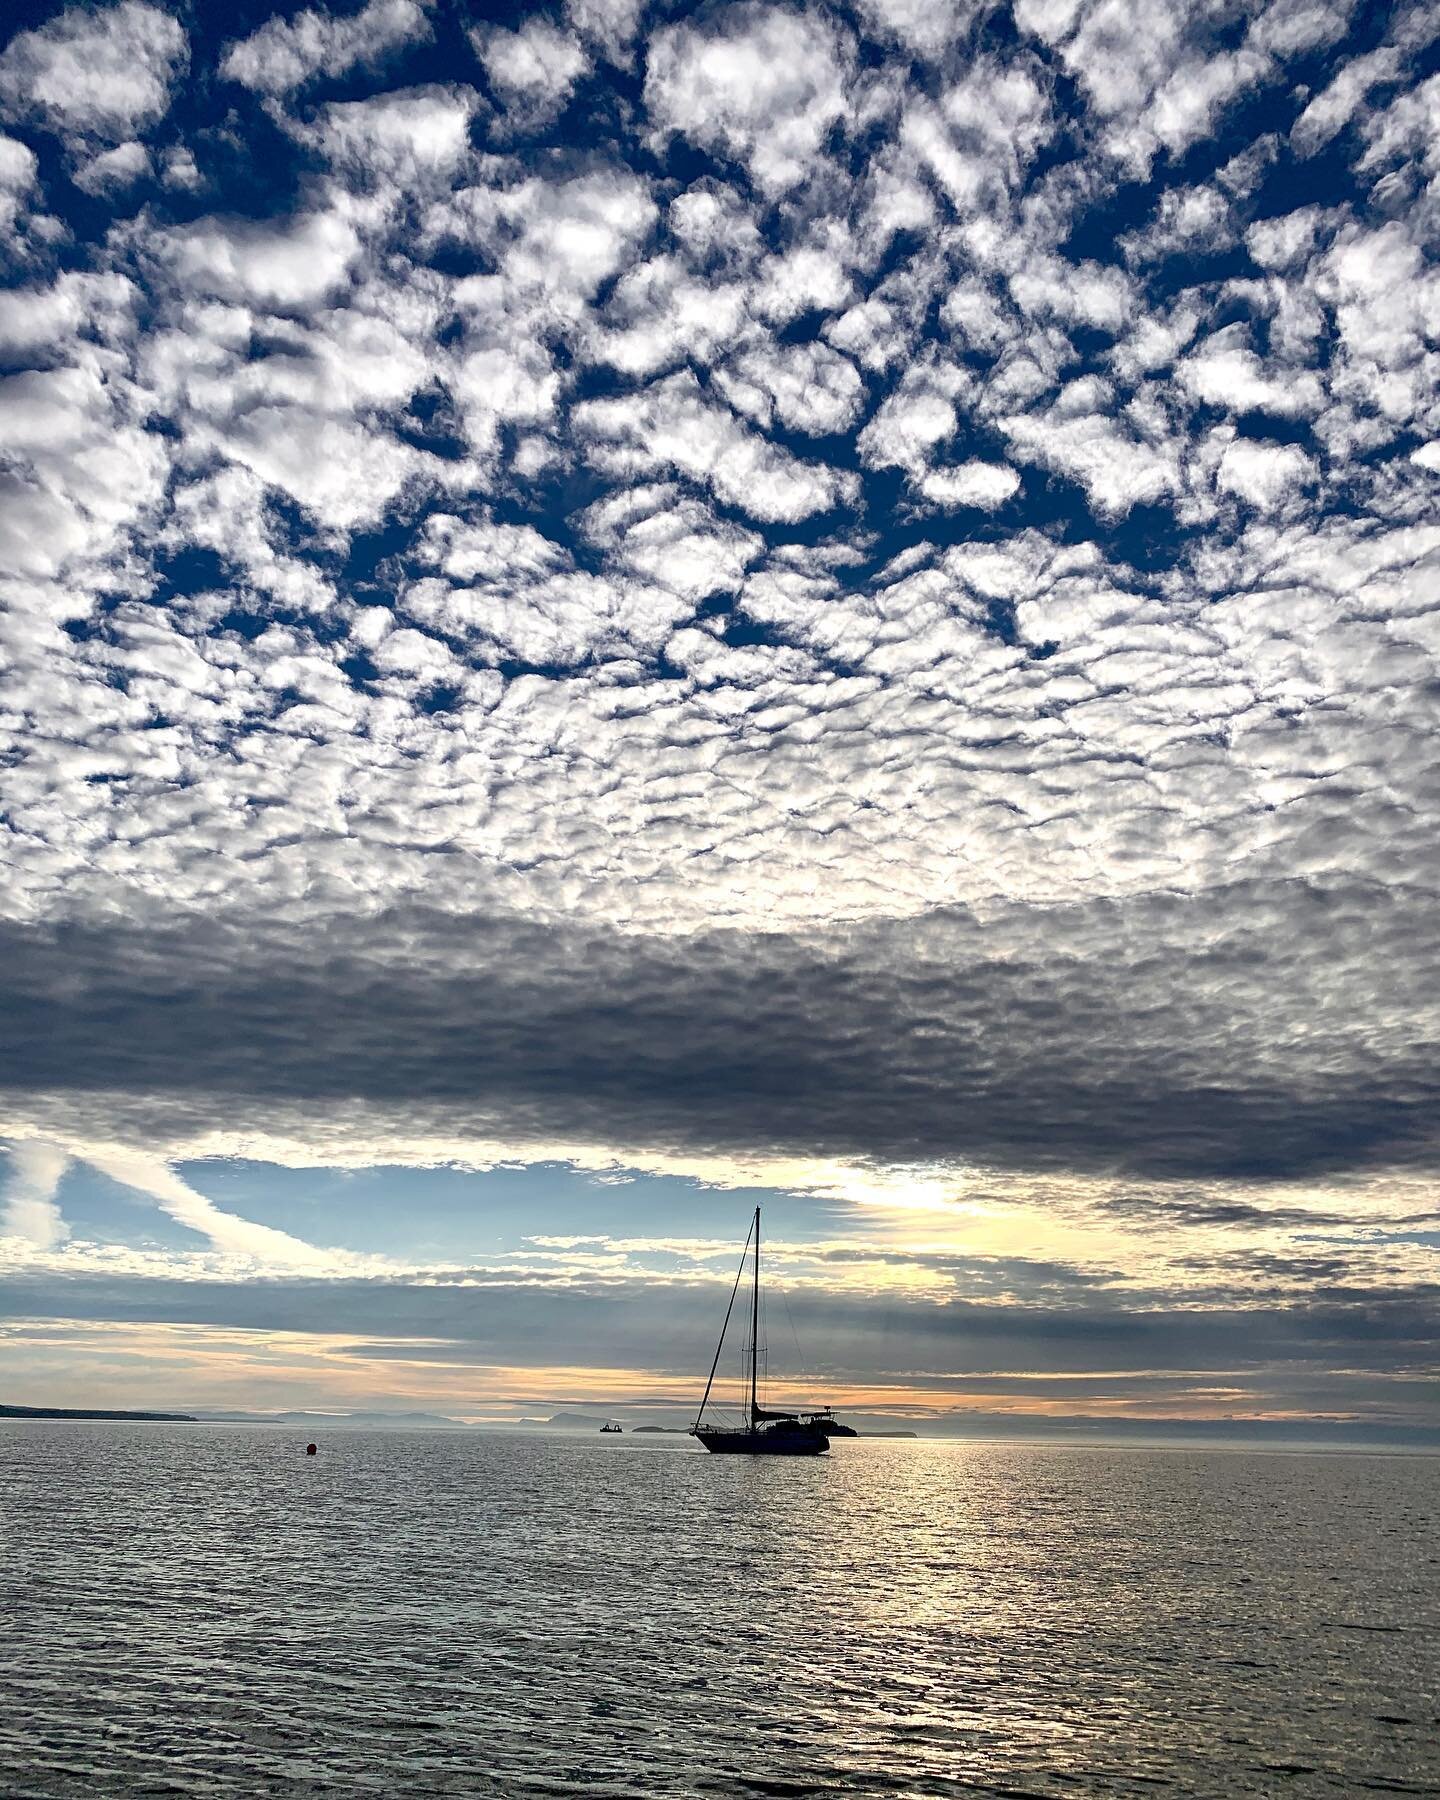 A fun shot from earlier this summer⛵️ ⛵️⛵️

#nature #photography #clouds #pnw #pacificnorthwest #naturephotography #love #travel #lummiisland #landscape #beautiful #naturelovers #art #photo #wildlife #travelphotography #life #beauty #summer #adventur